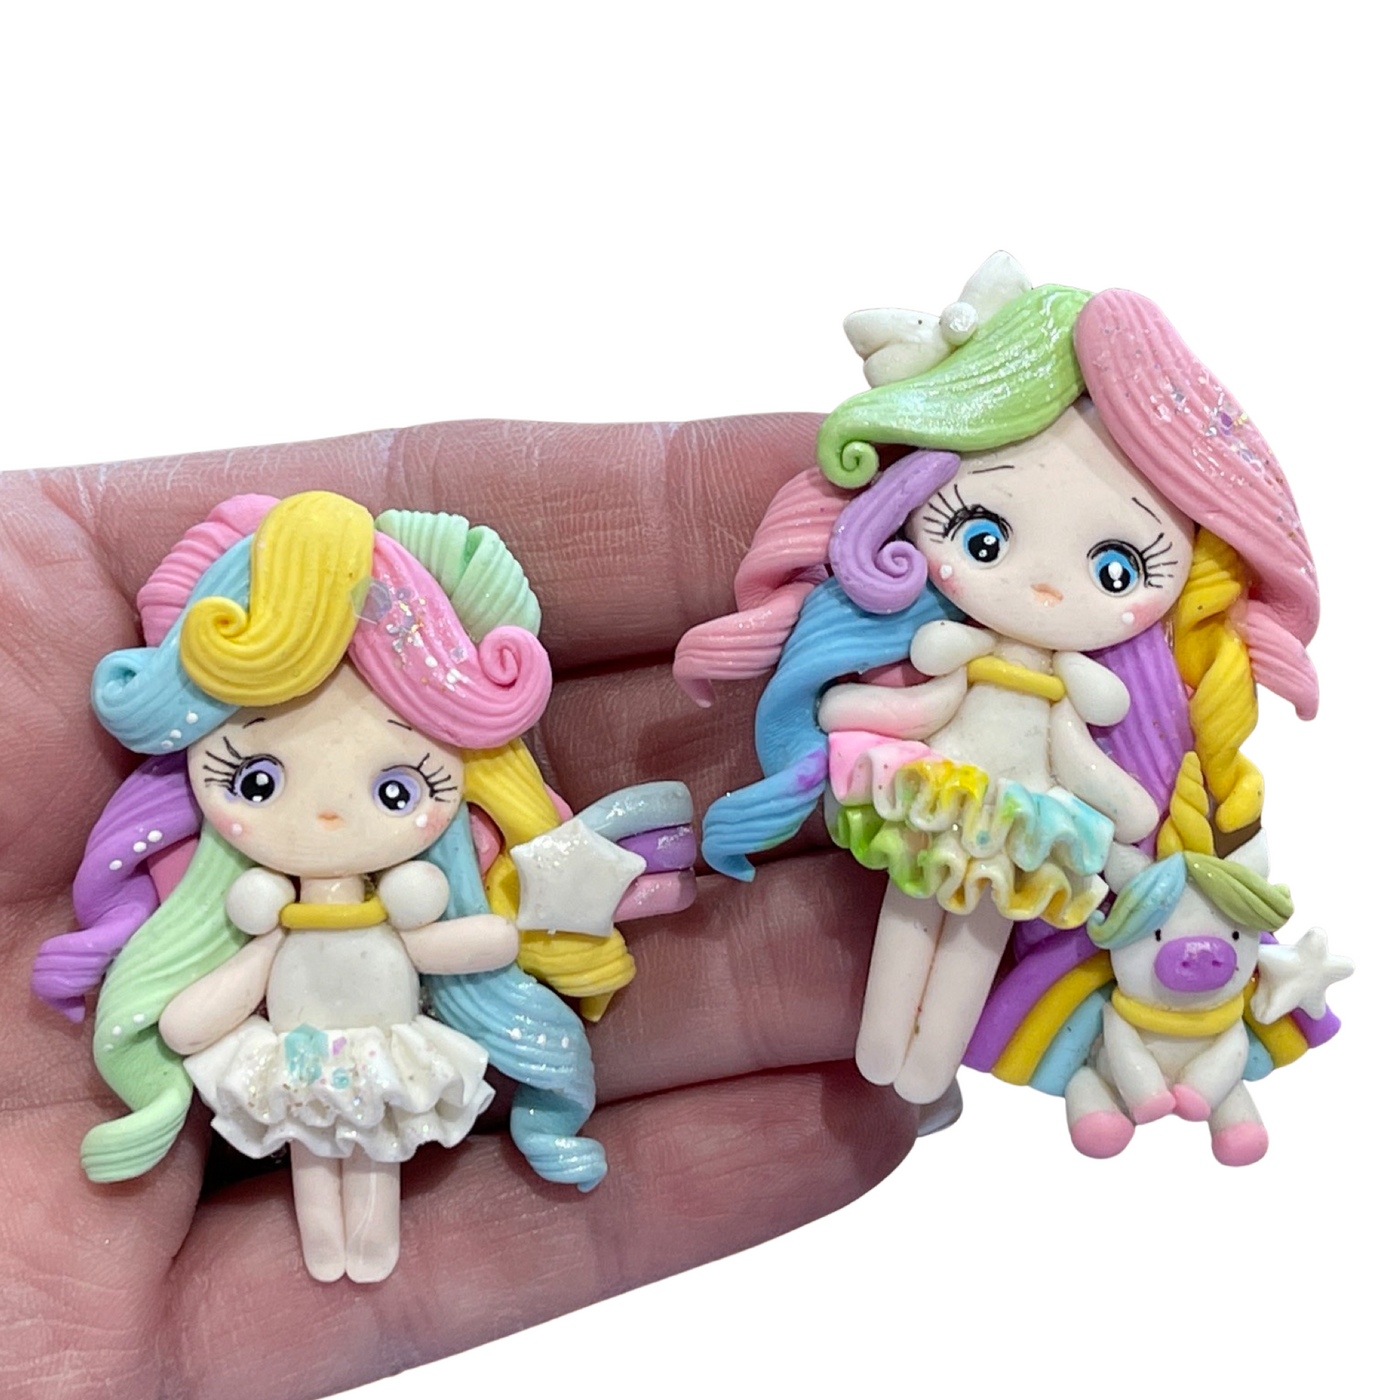 Rainbow Star Girl Clay from our Enchanted Maker